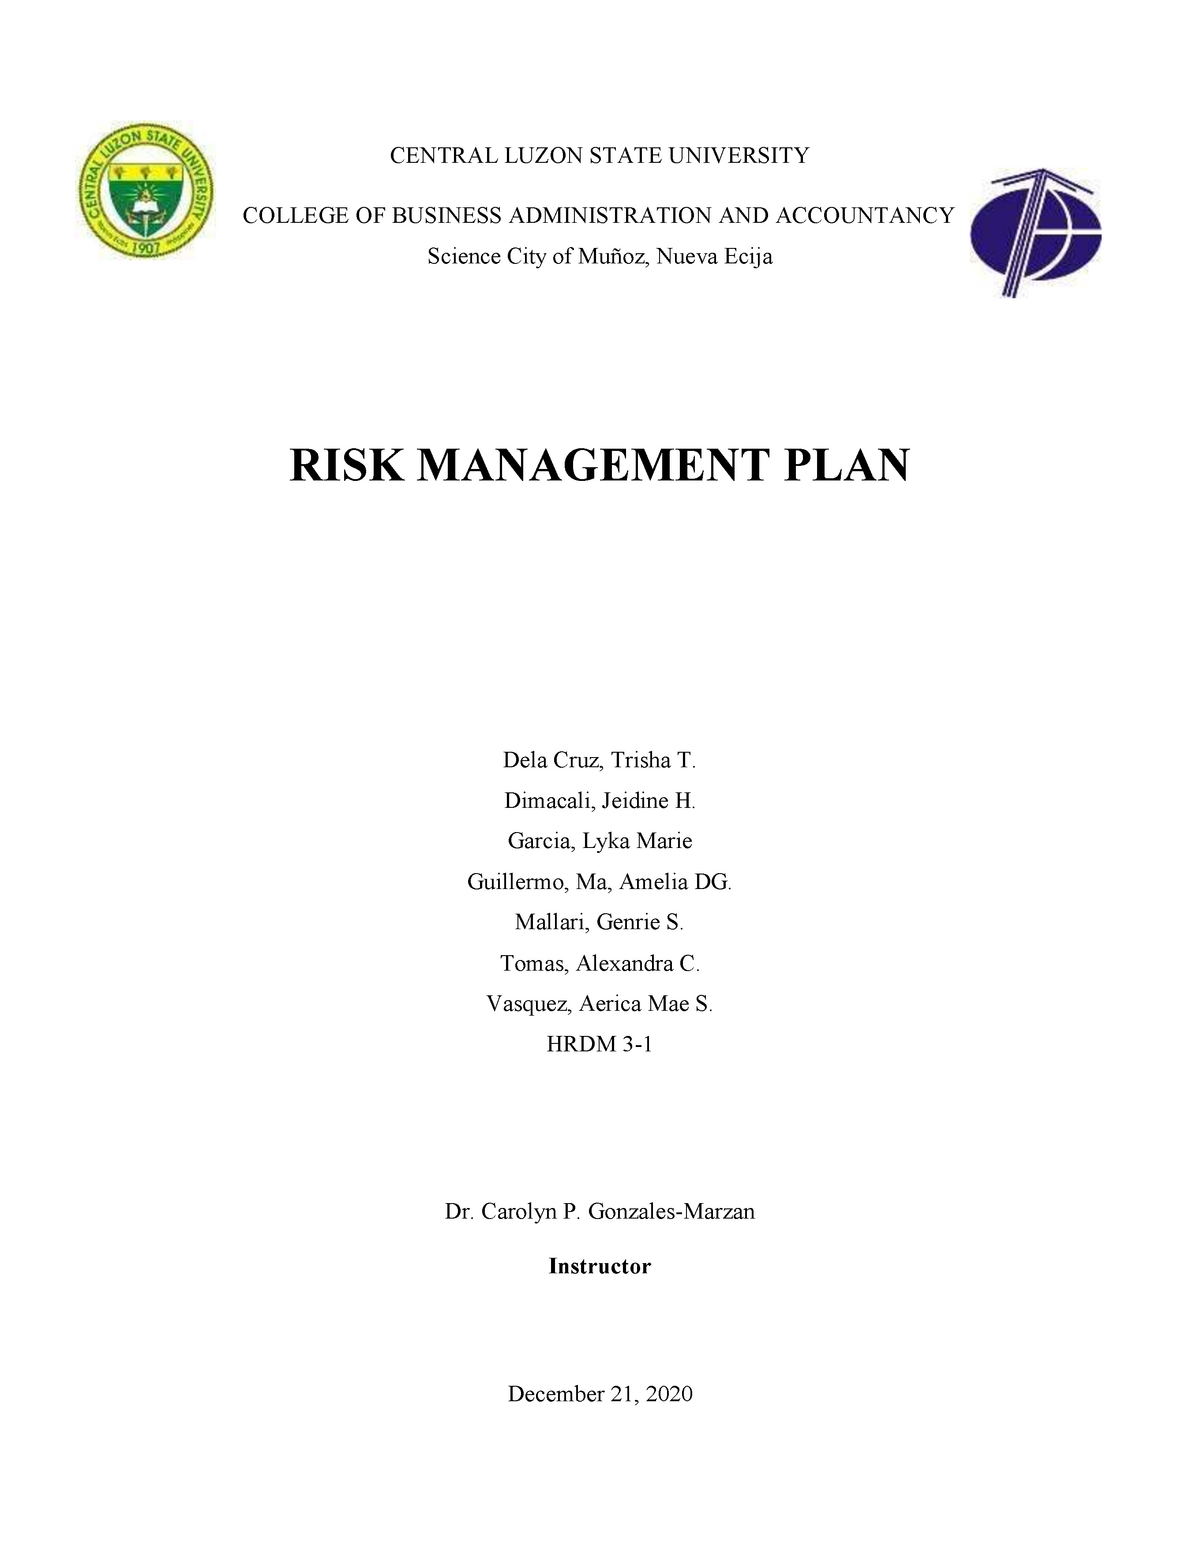 case study about risk management in the philippines